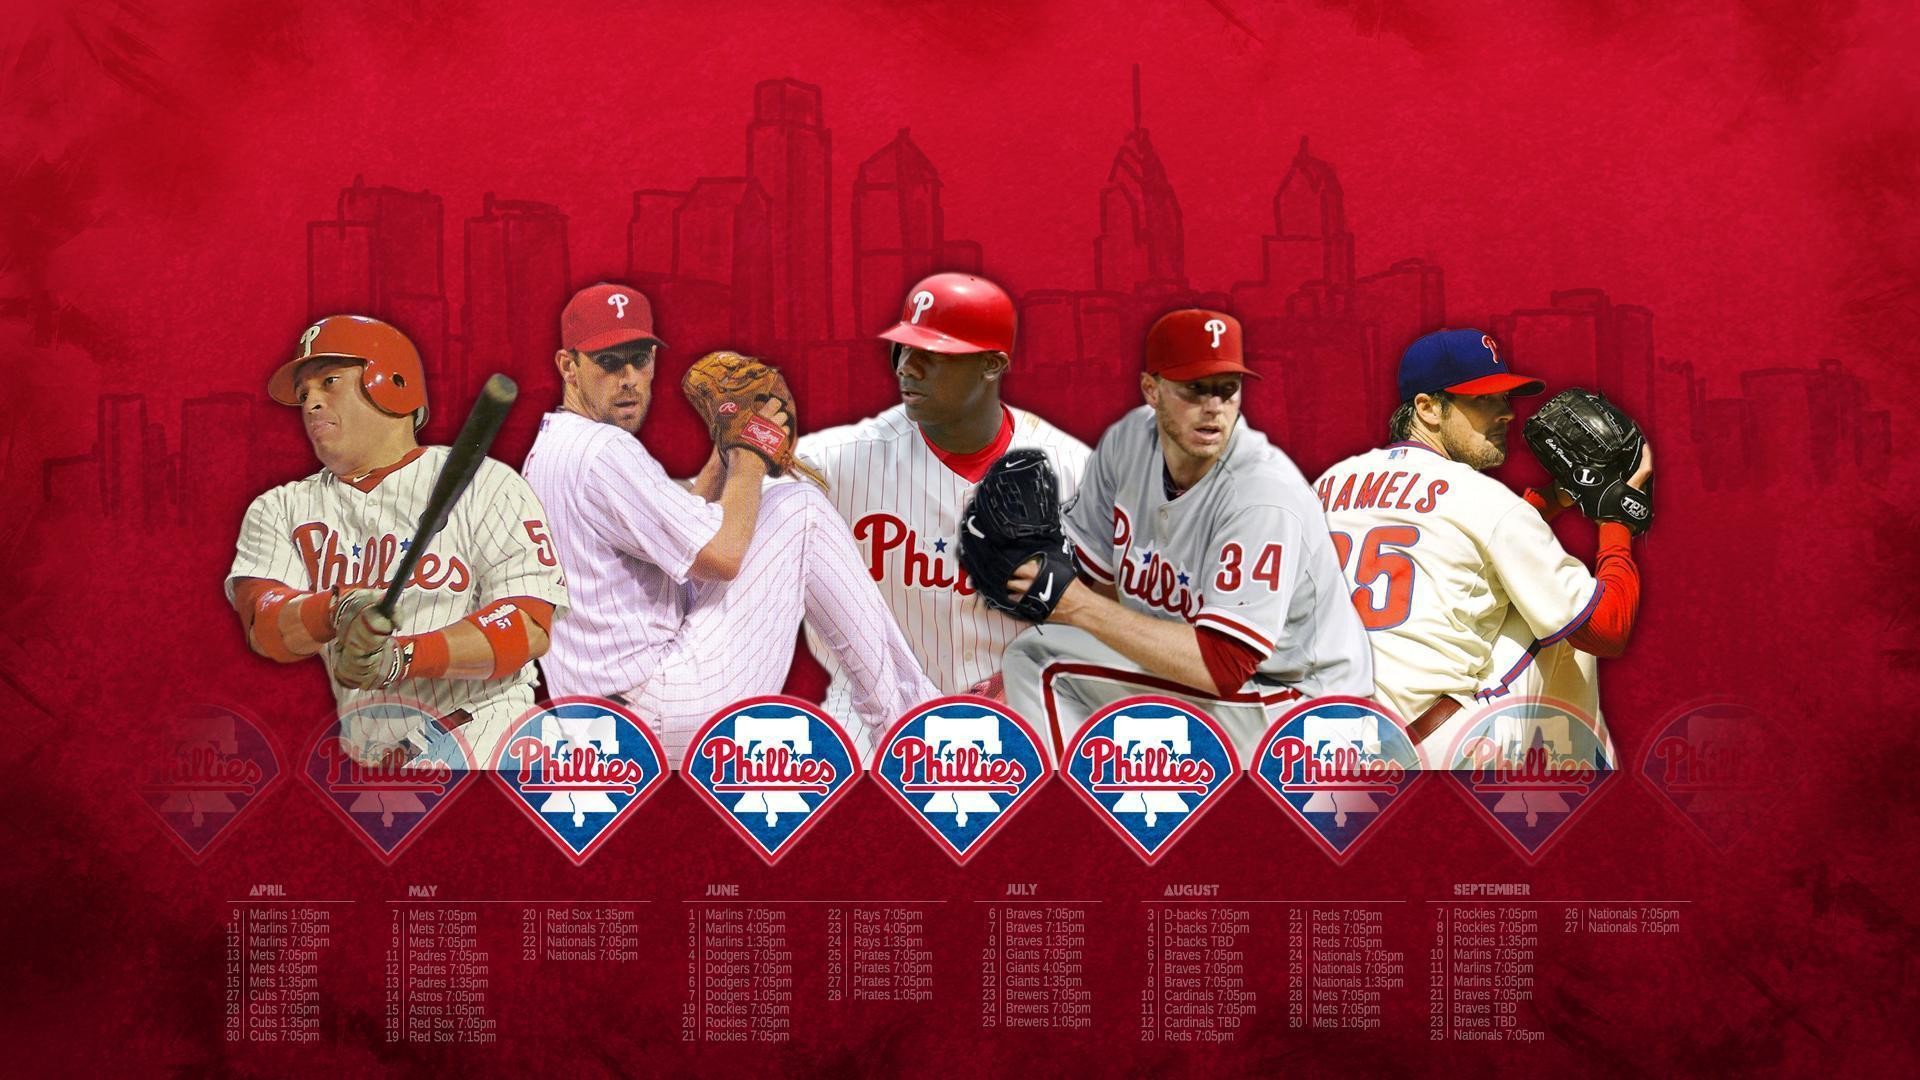 Philadelphia Phillies on Twitter WERE GOING TO THE WORLD SERIES  RedOctober httpstcoOMP83pcCxZ  Twitter